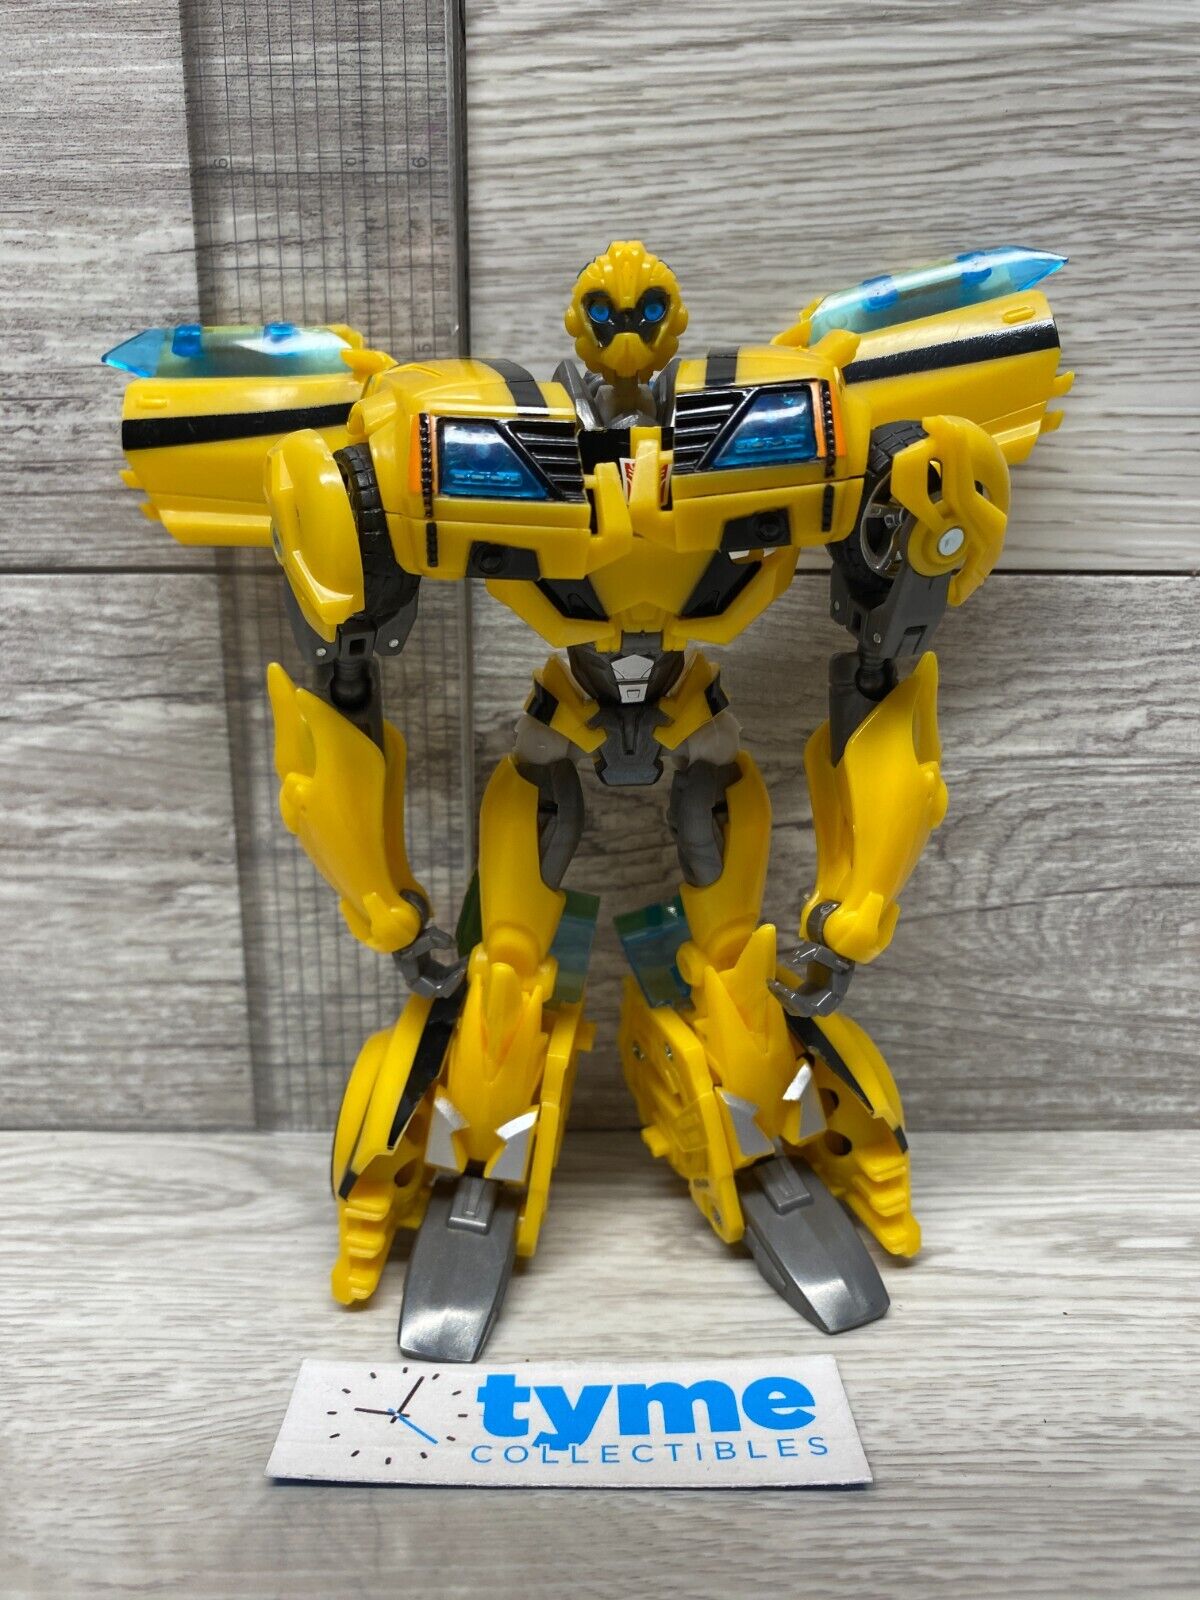 Transformers Prime First Edition Deluxe Class Autobot Bumblebee Action Figure